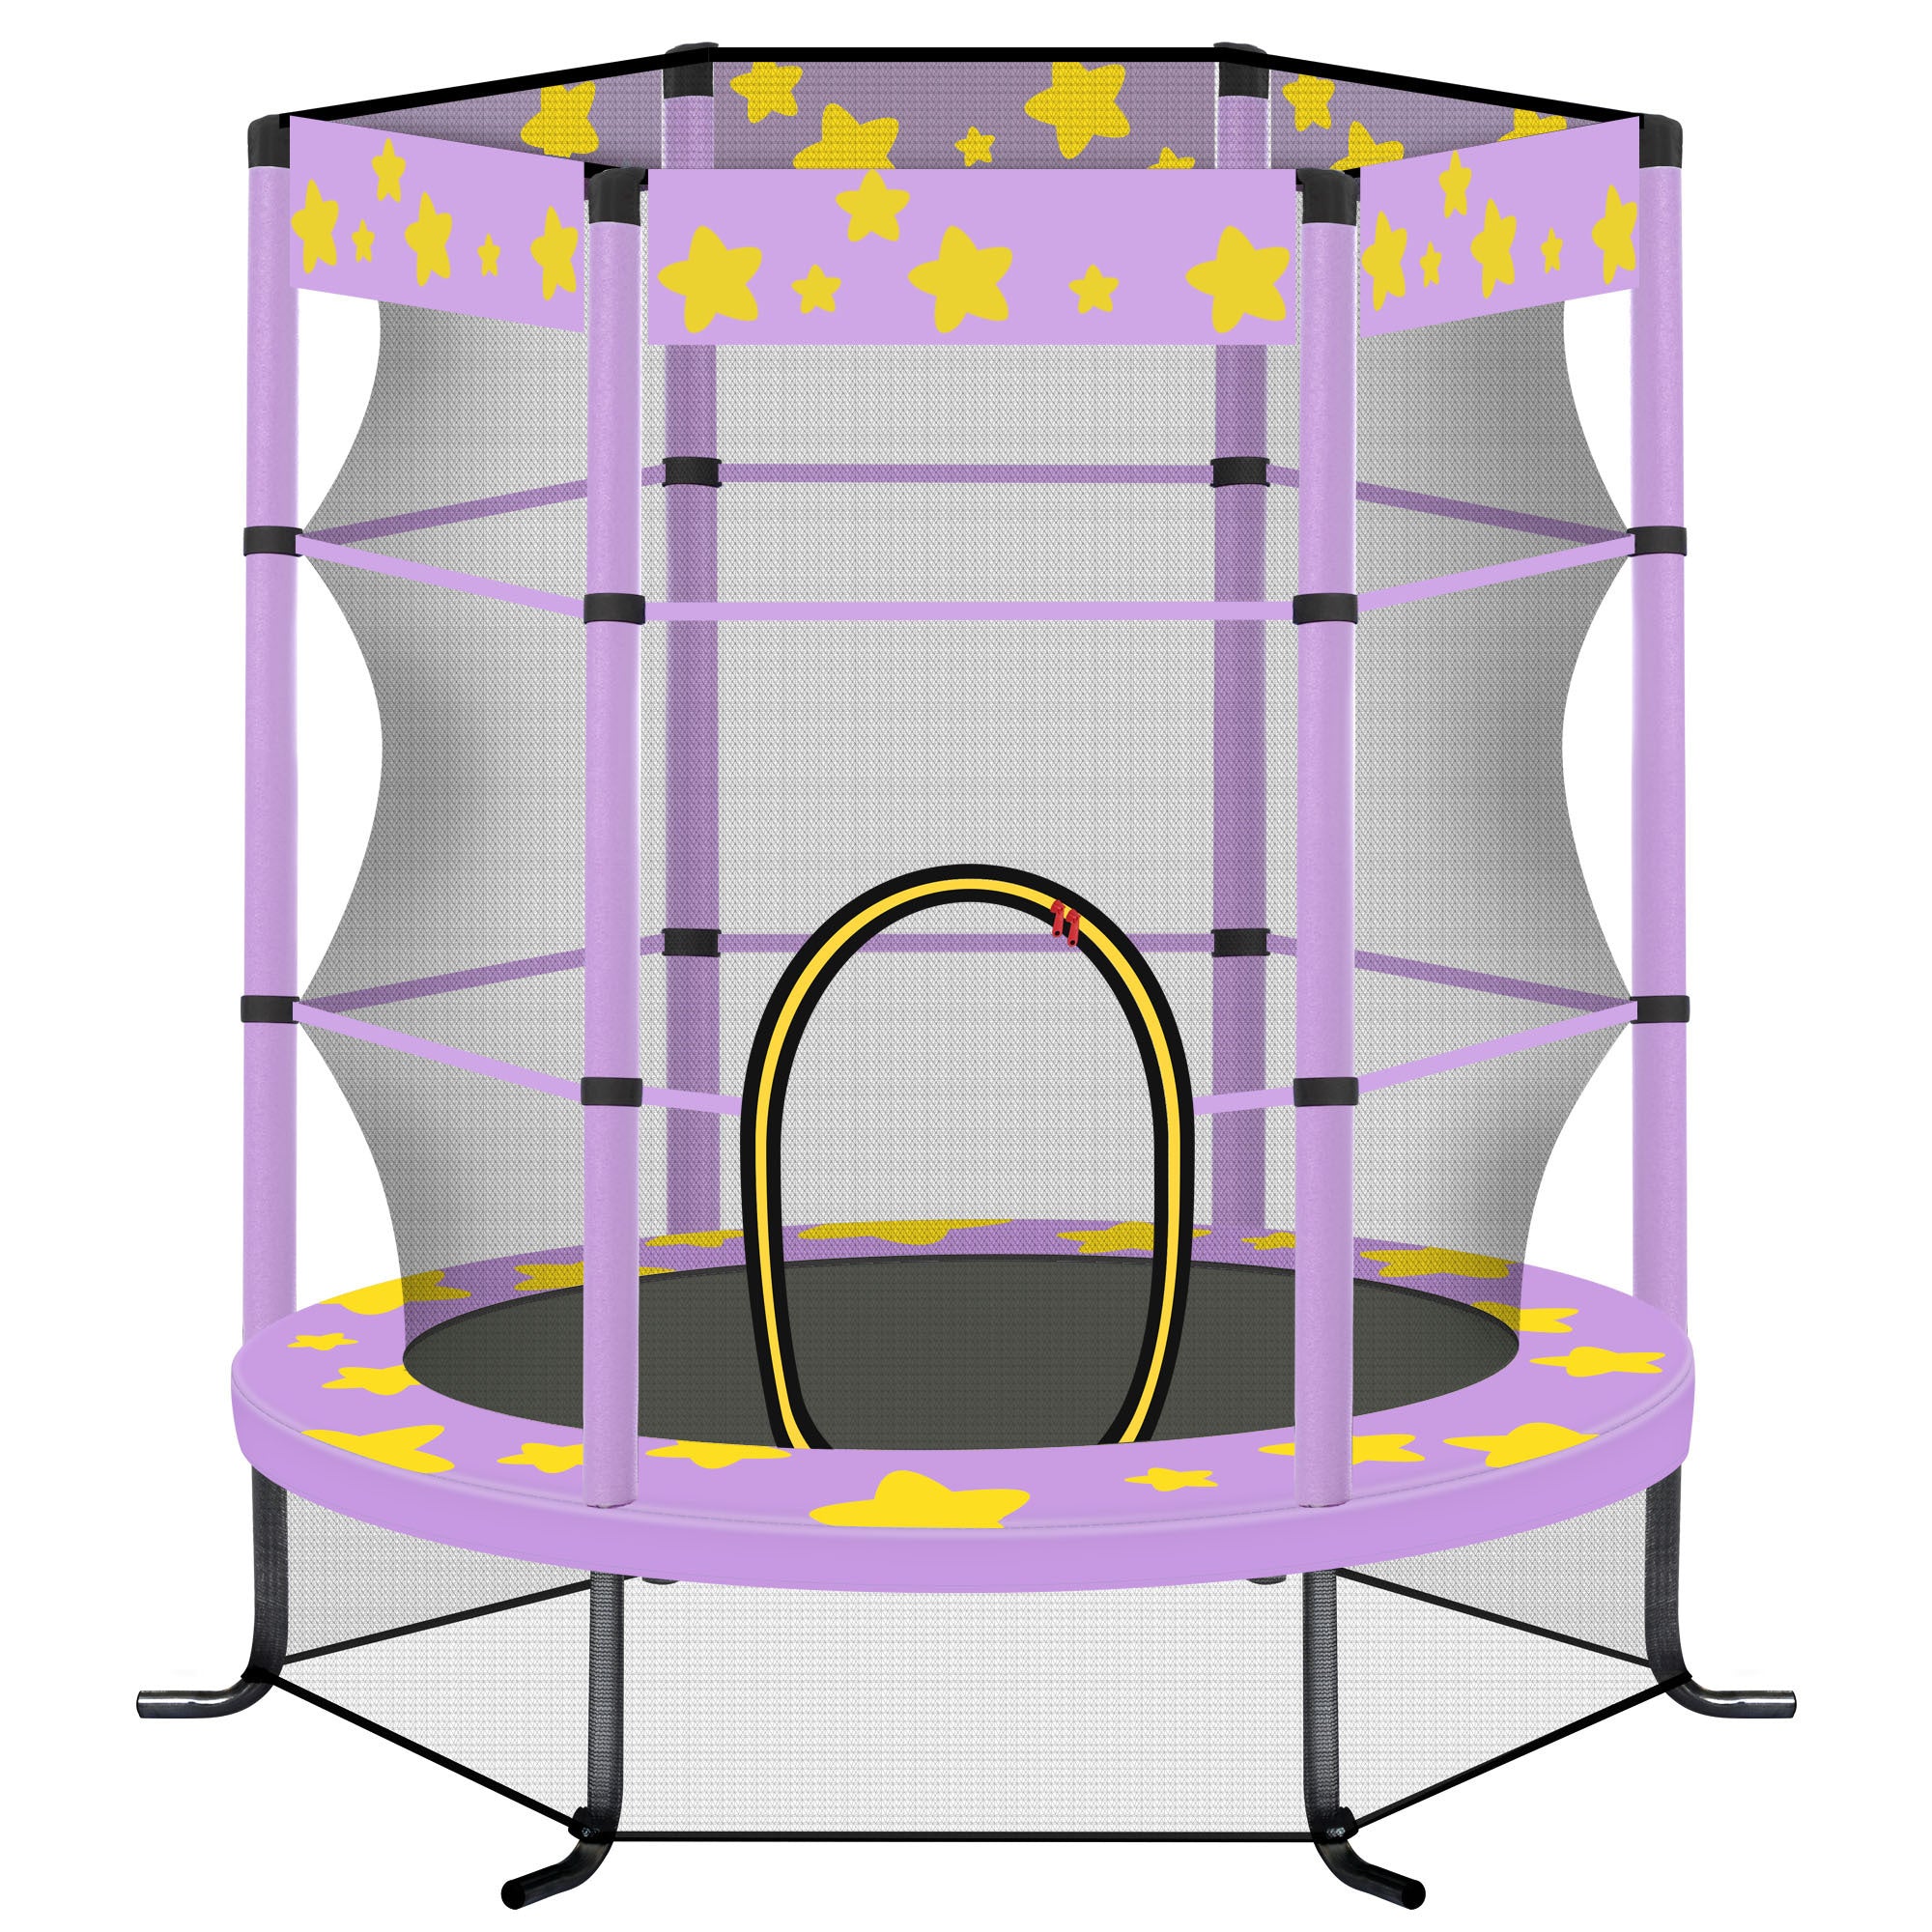 55-Inch-Kids-Trampoline-with-Safety-Enclosure-Net,-4.5FT-Outdoor-Indoor-Trampoline-for-Kids-(Purple)-Exercise-&-Fitness